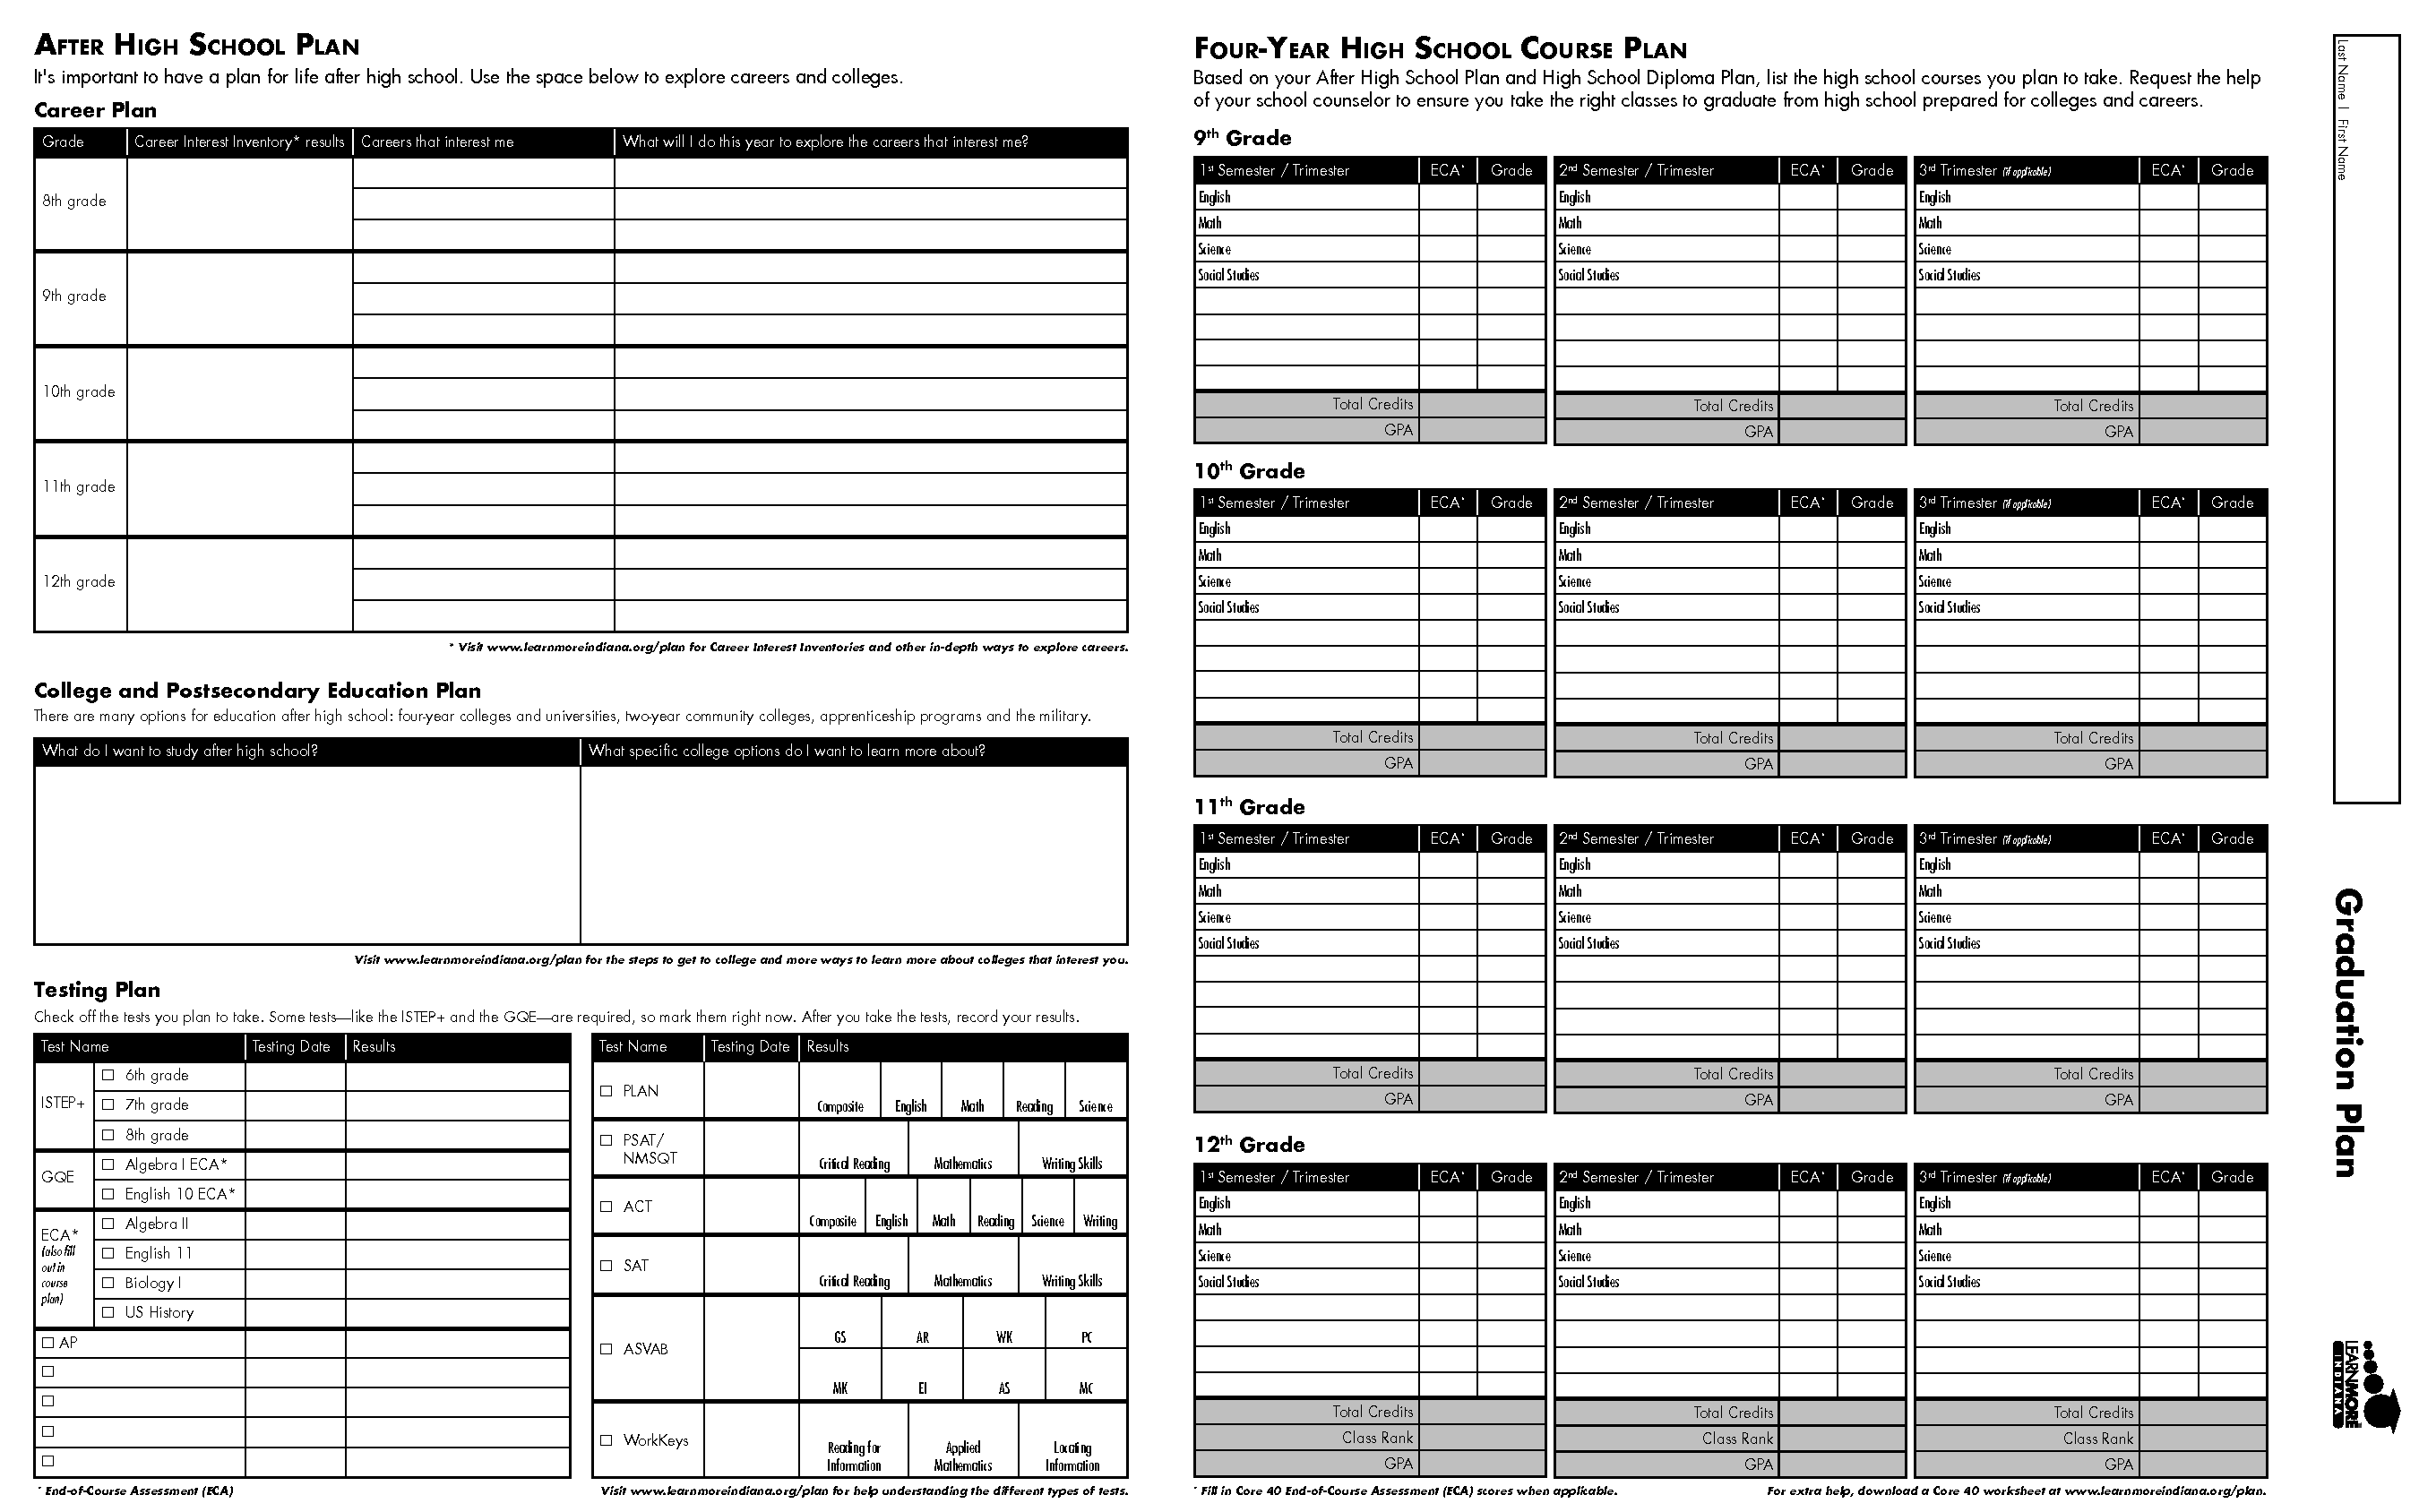 High School Four-Year Plan Template Image